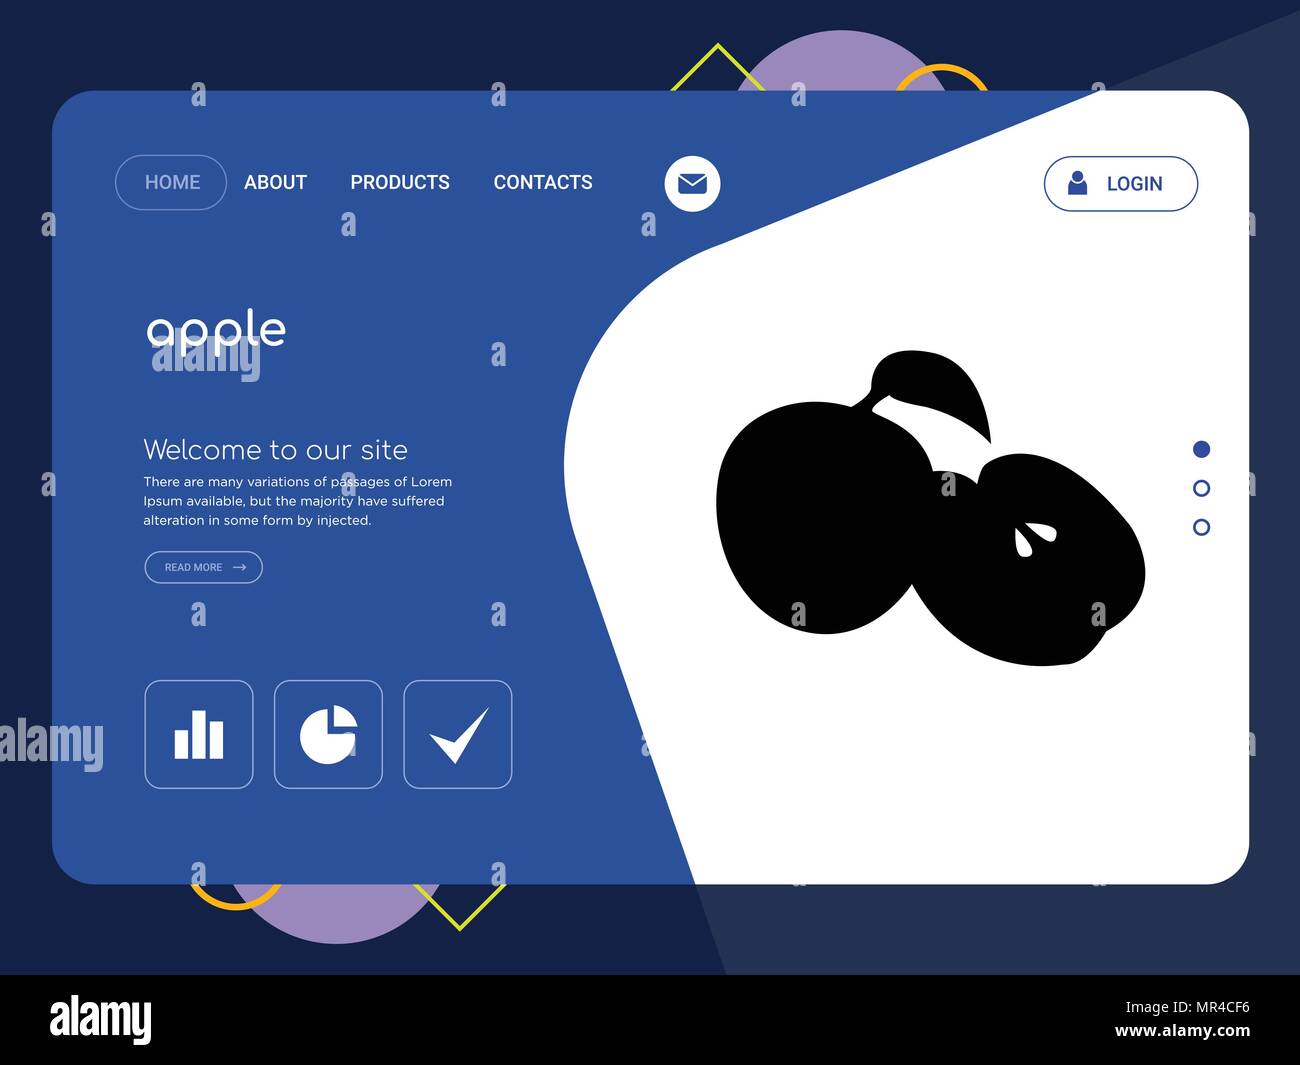 quality-one-page-apple-website-template-vector-eps-modern-web-design